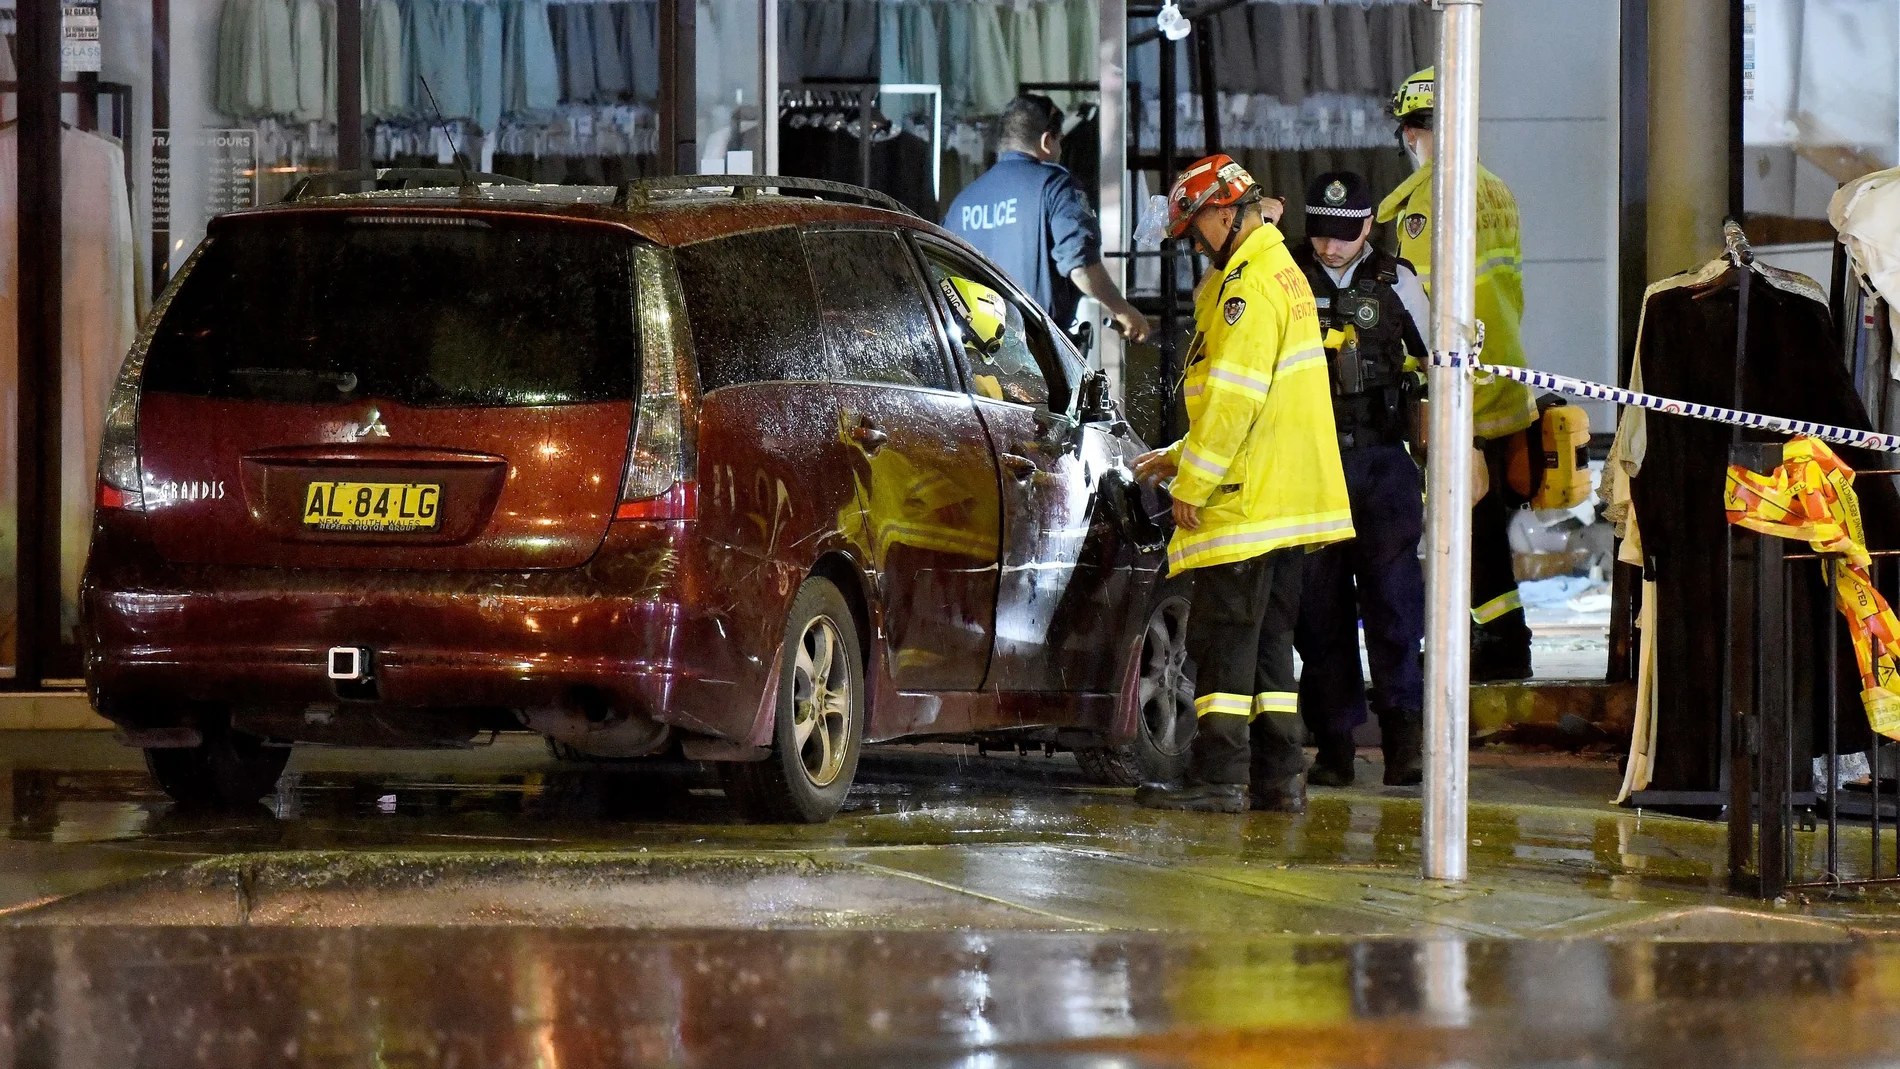 A vehicle is removed from a shop after it crashed through the front windows in Sydney